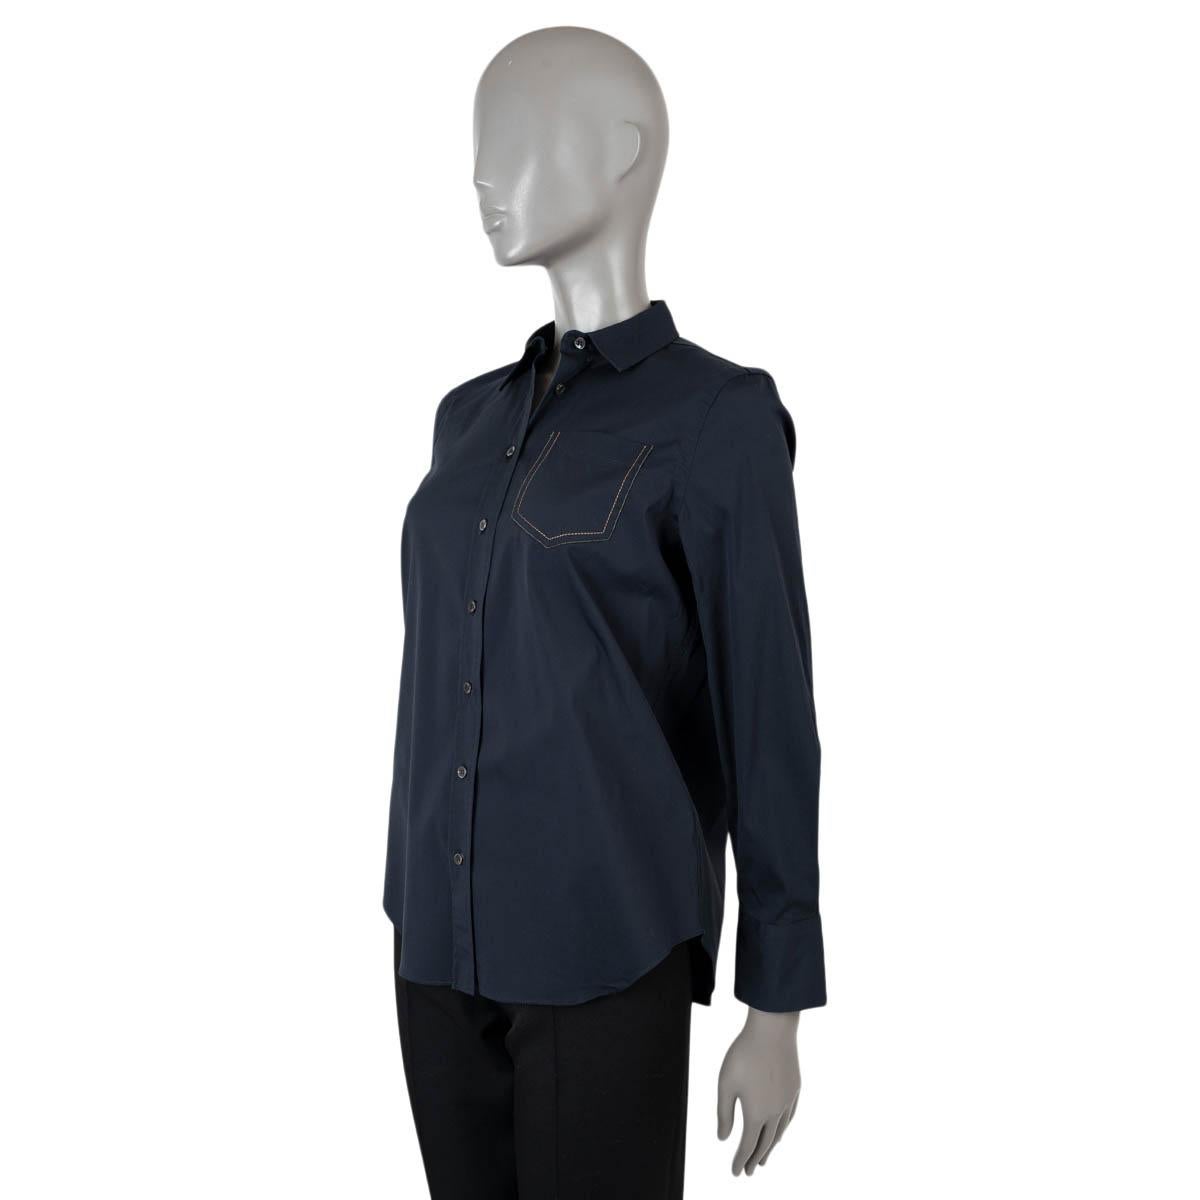 100% authentic Brunello Cucinelli poplin shirt in navy blue cotton (72%), polyamide (23%) and elastane (5%). Features a Monili trimmed open chest pocket. Closes with buttons down the front. Has been worn and is in excellent condition.